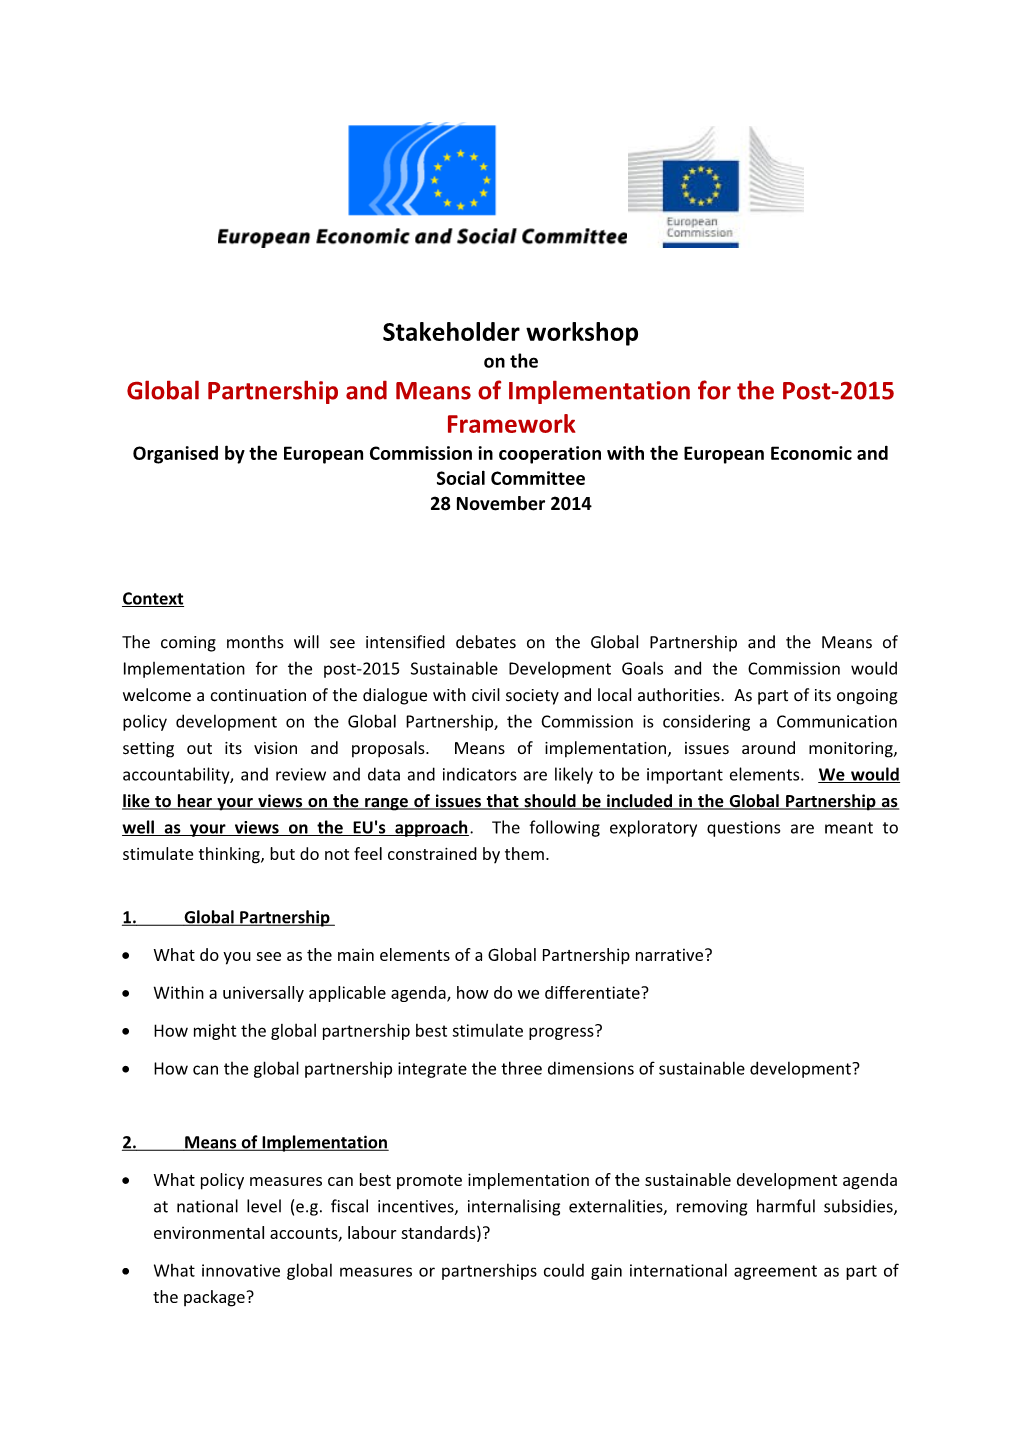 Global Partnership and Means of Implementation for the Post-2015 Framework